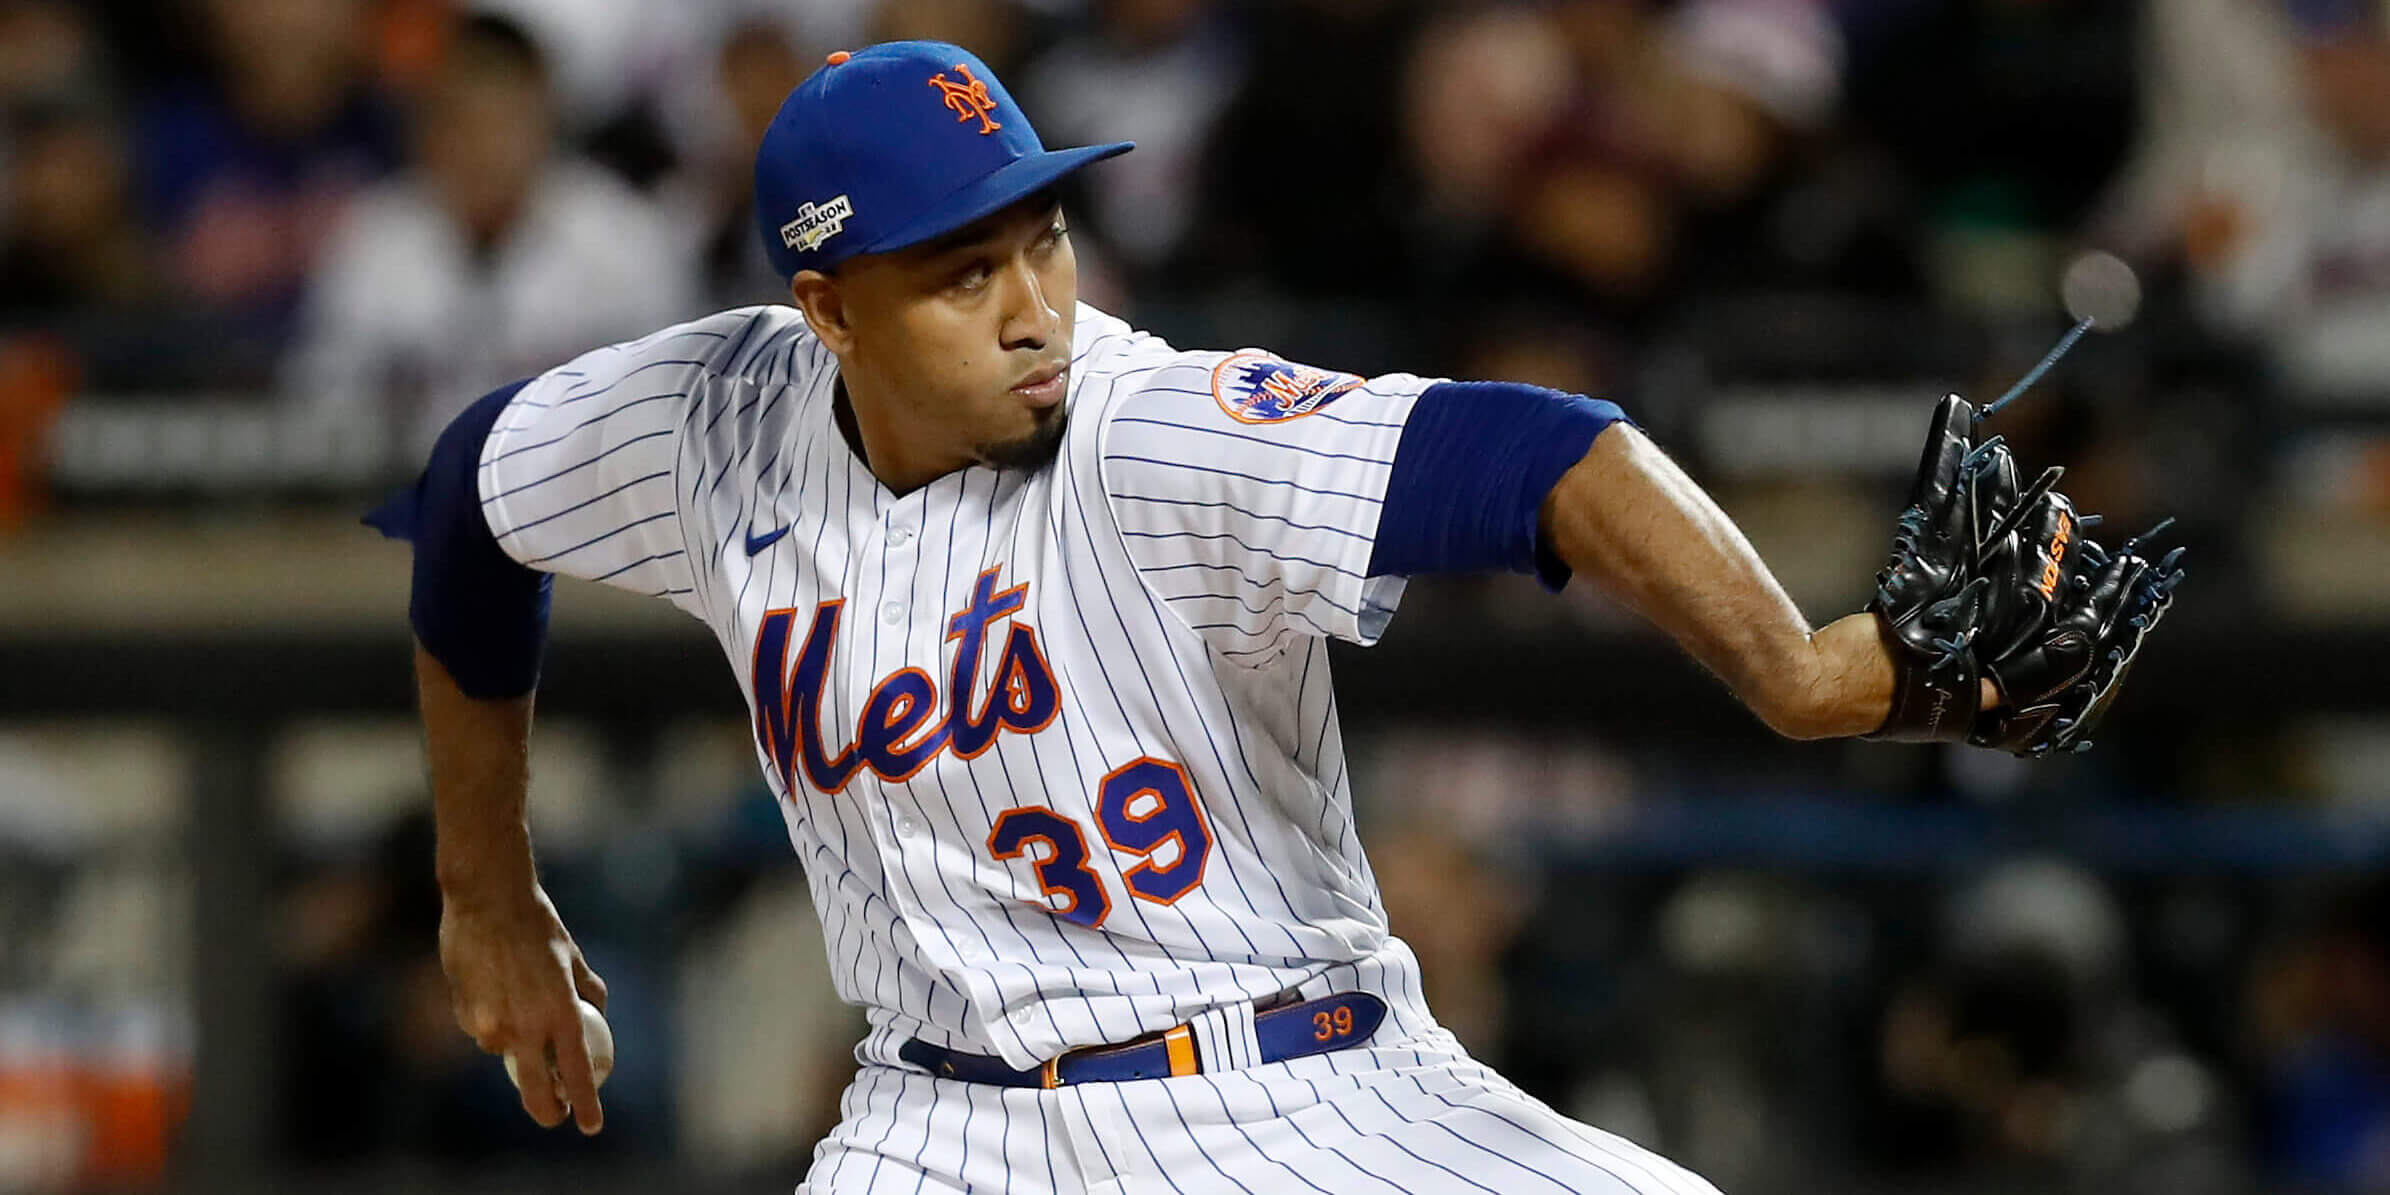  Inside Edwin Diaz’s first 48 hours since his injury: ‘Optimism’ for return in 2023 